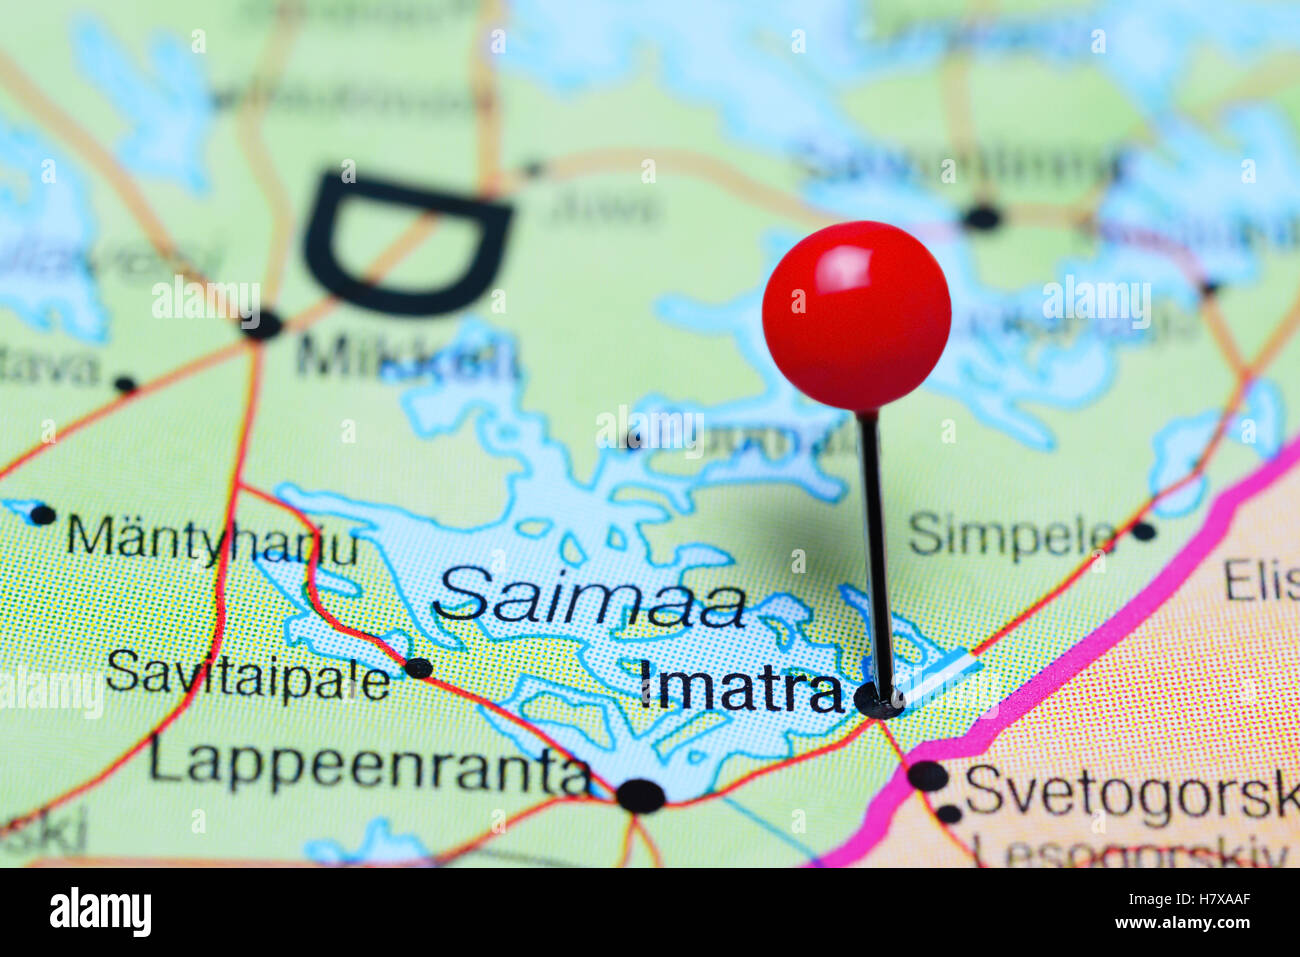 Imatra pinned on a map of Finland Stock Photo